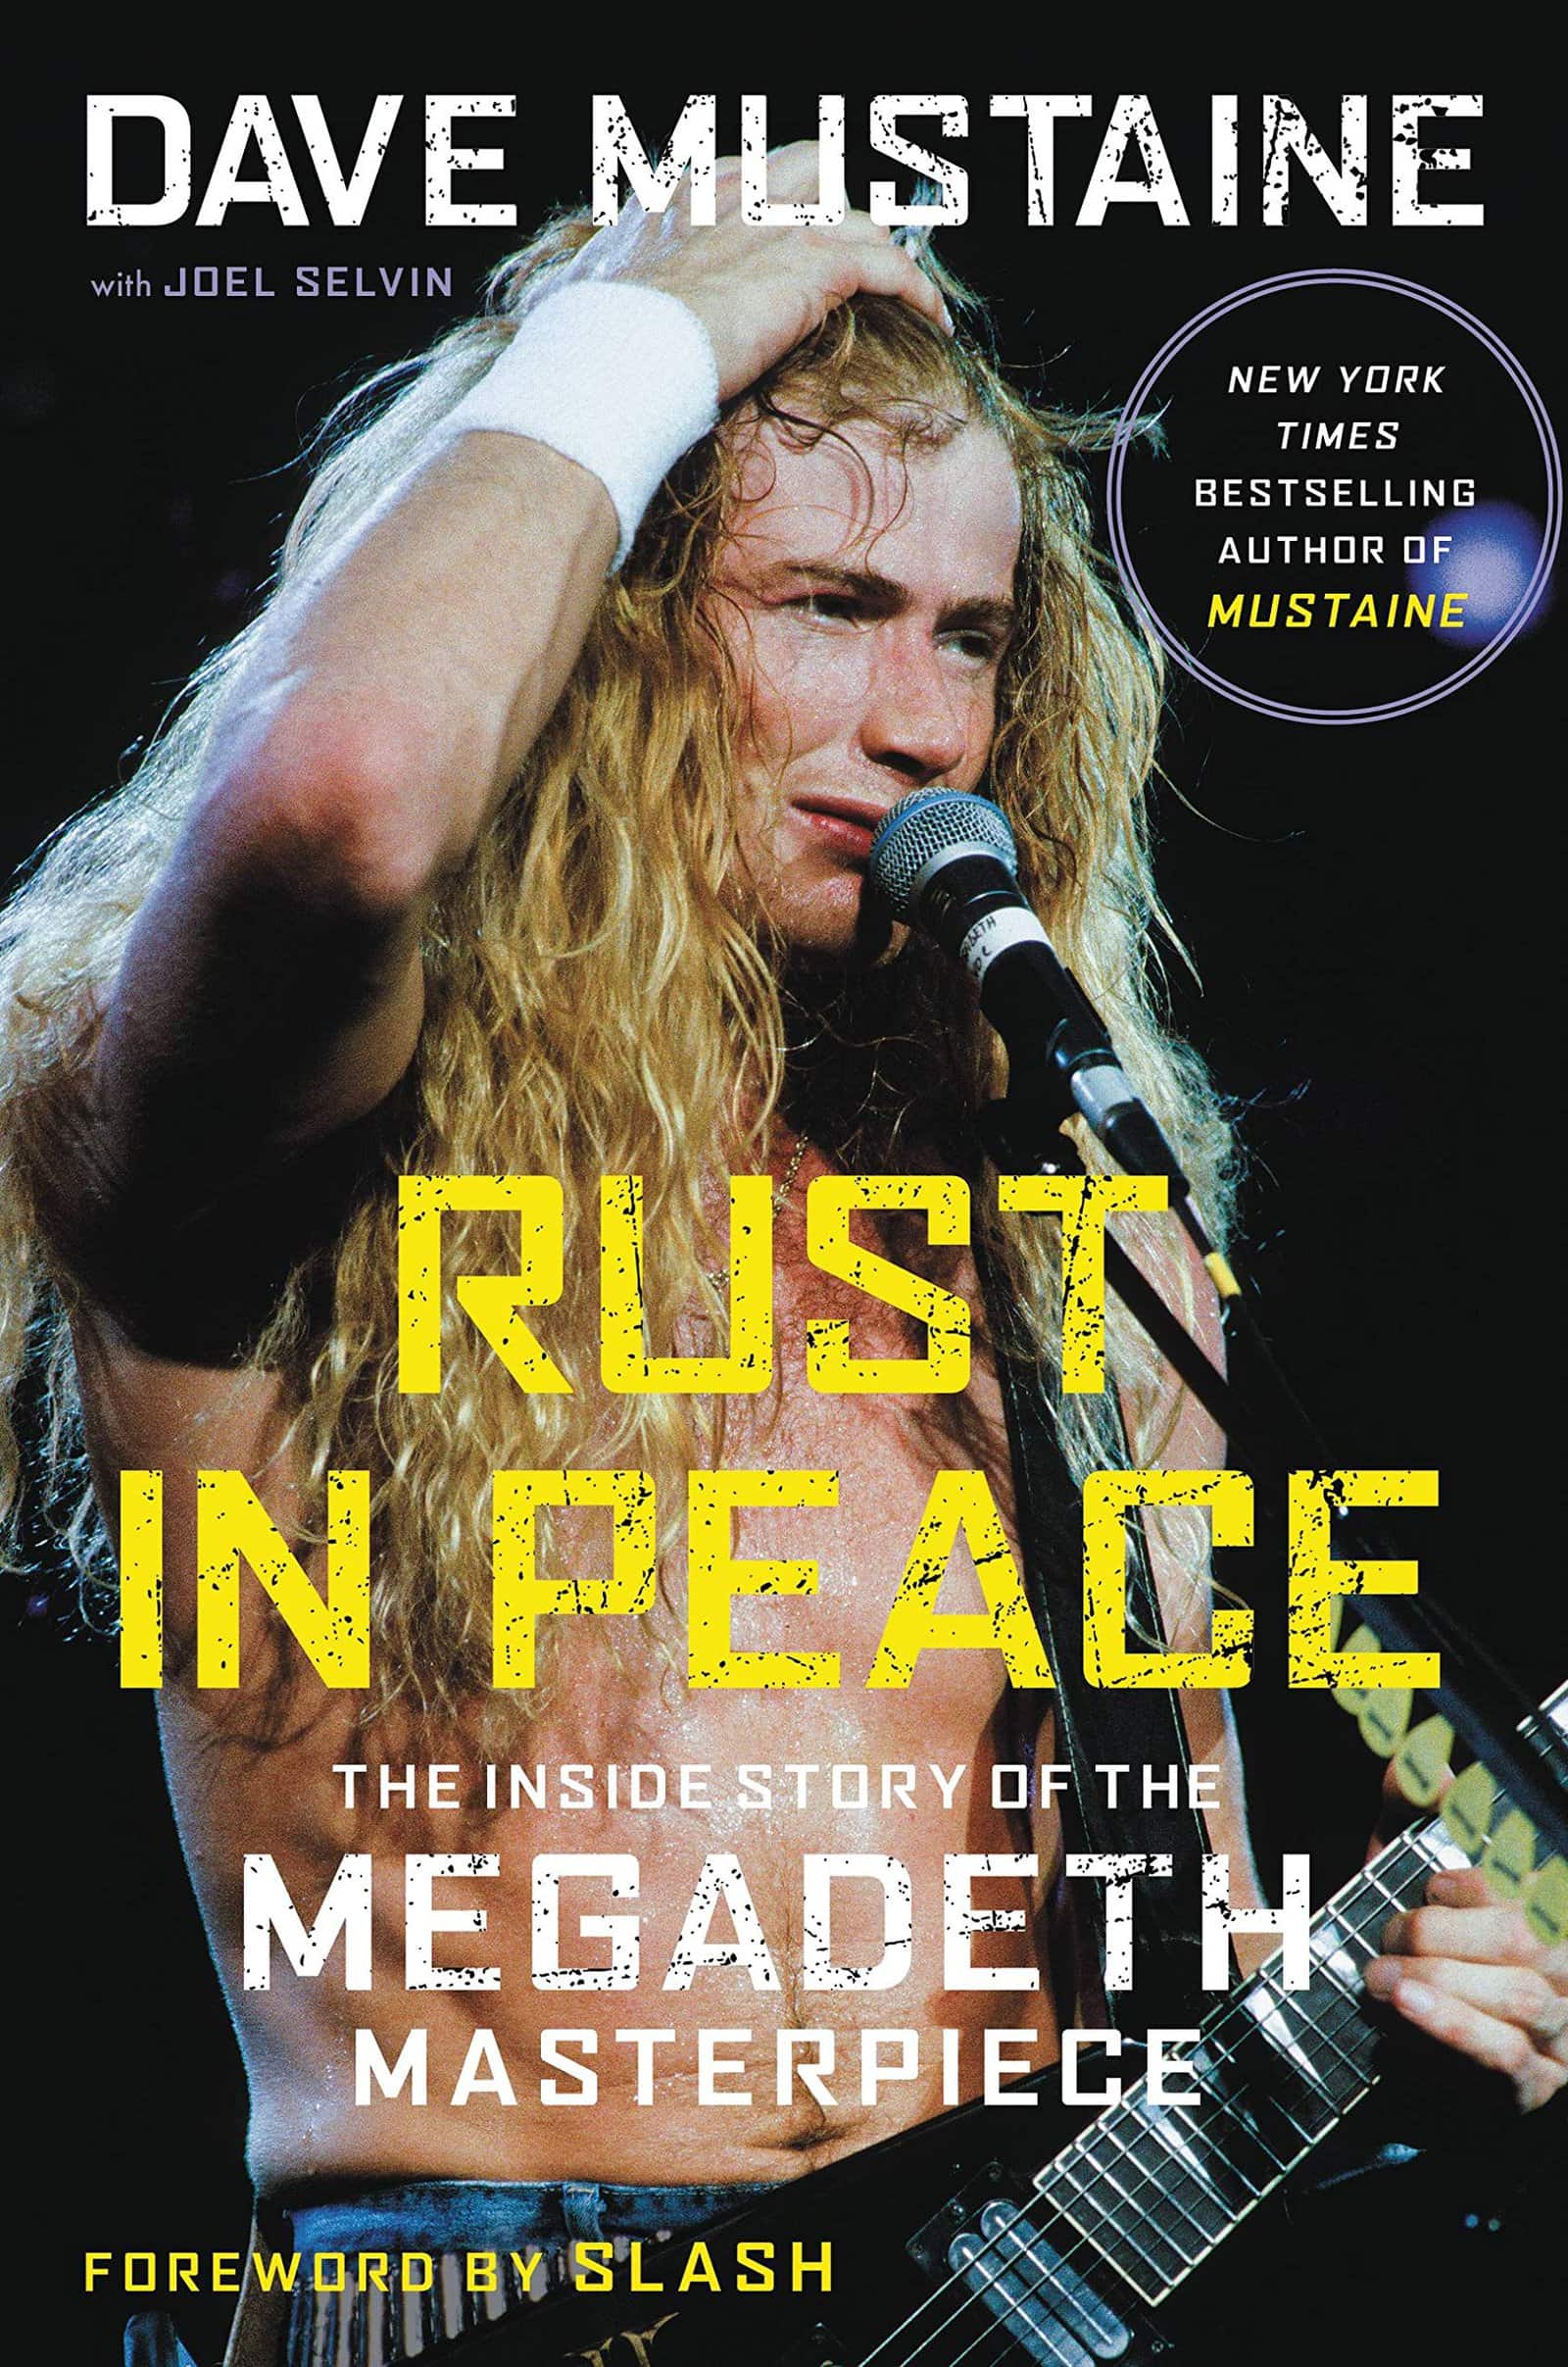 Rust In Peace: The Inside Story of the Megadeth Masterpiece